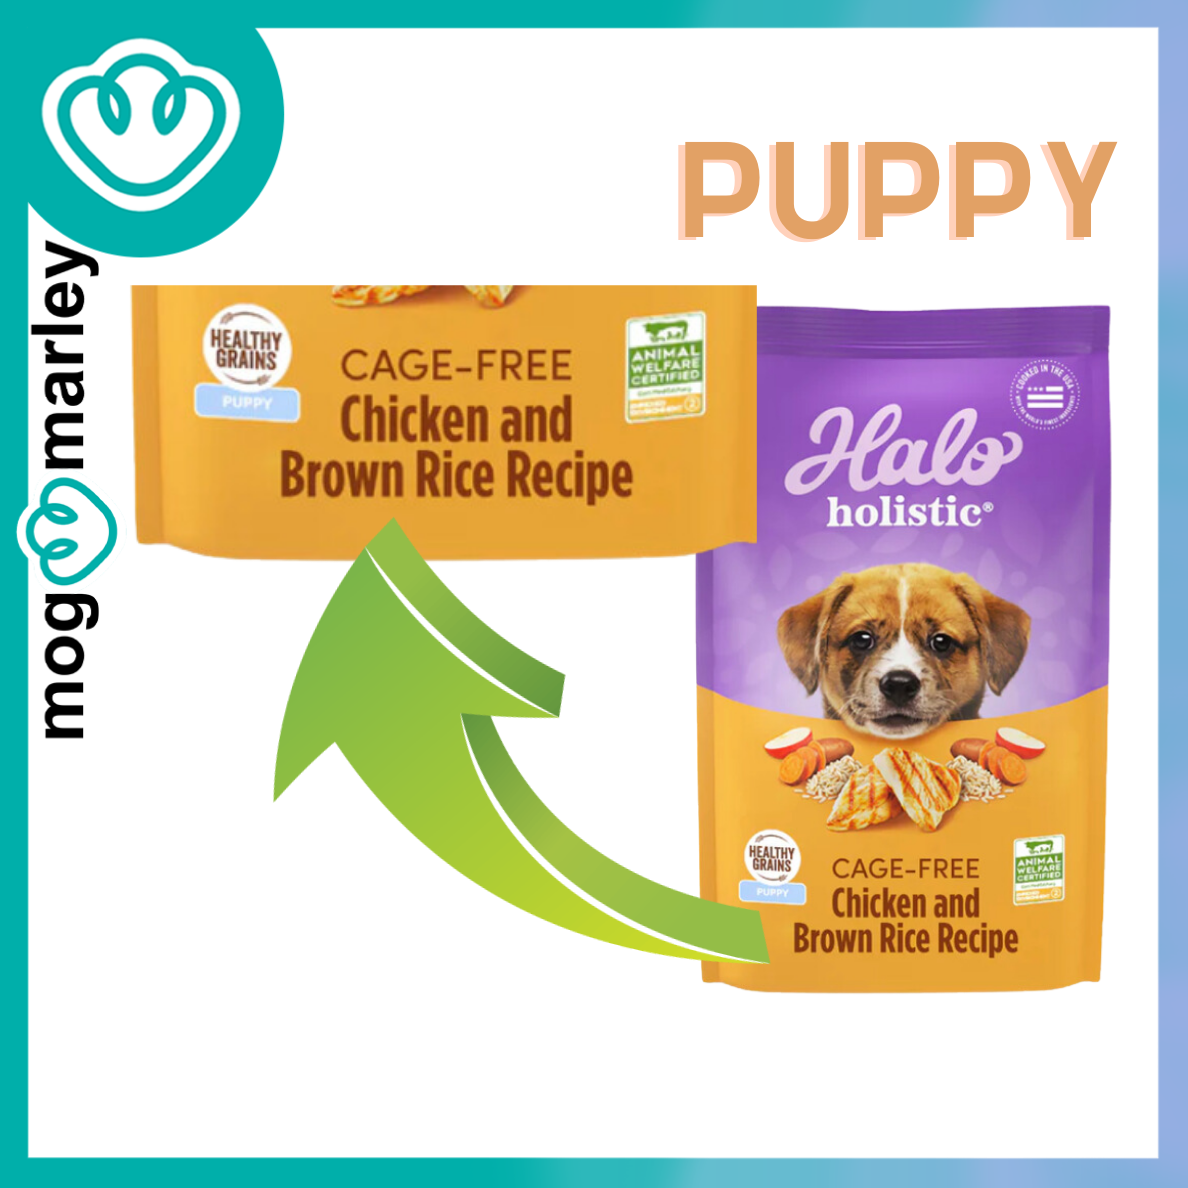 BUY3 1.4kg Halo Holistic Puppy Healthy Grains Cage-Free Chicken & Brown Rice Dry Food - mog&marley